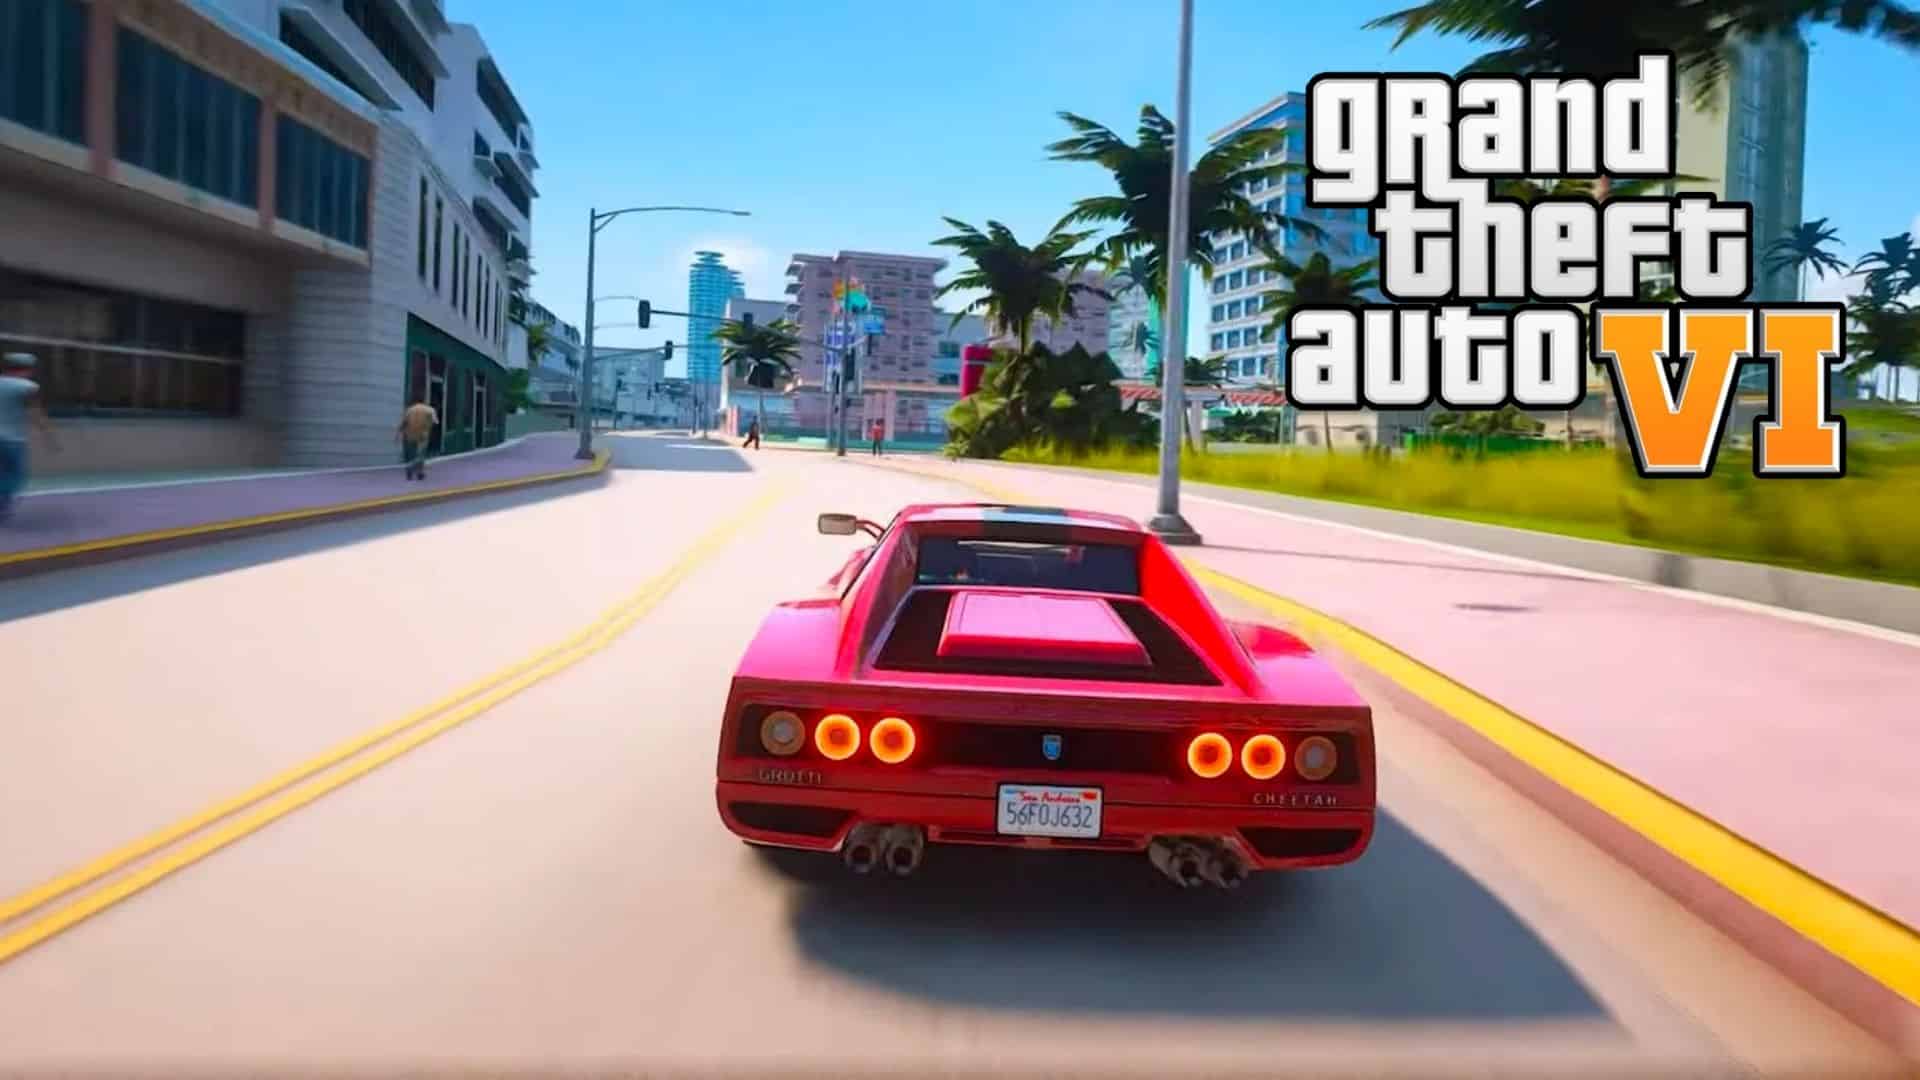 GTA 6 PC version may be less of a priority, ex Rockstar dev says